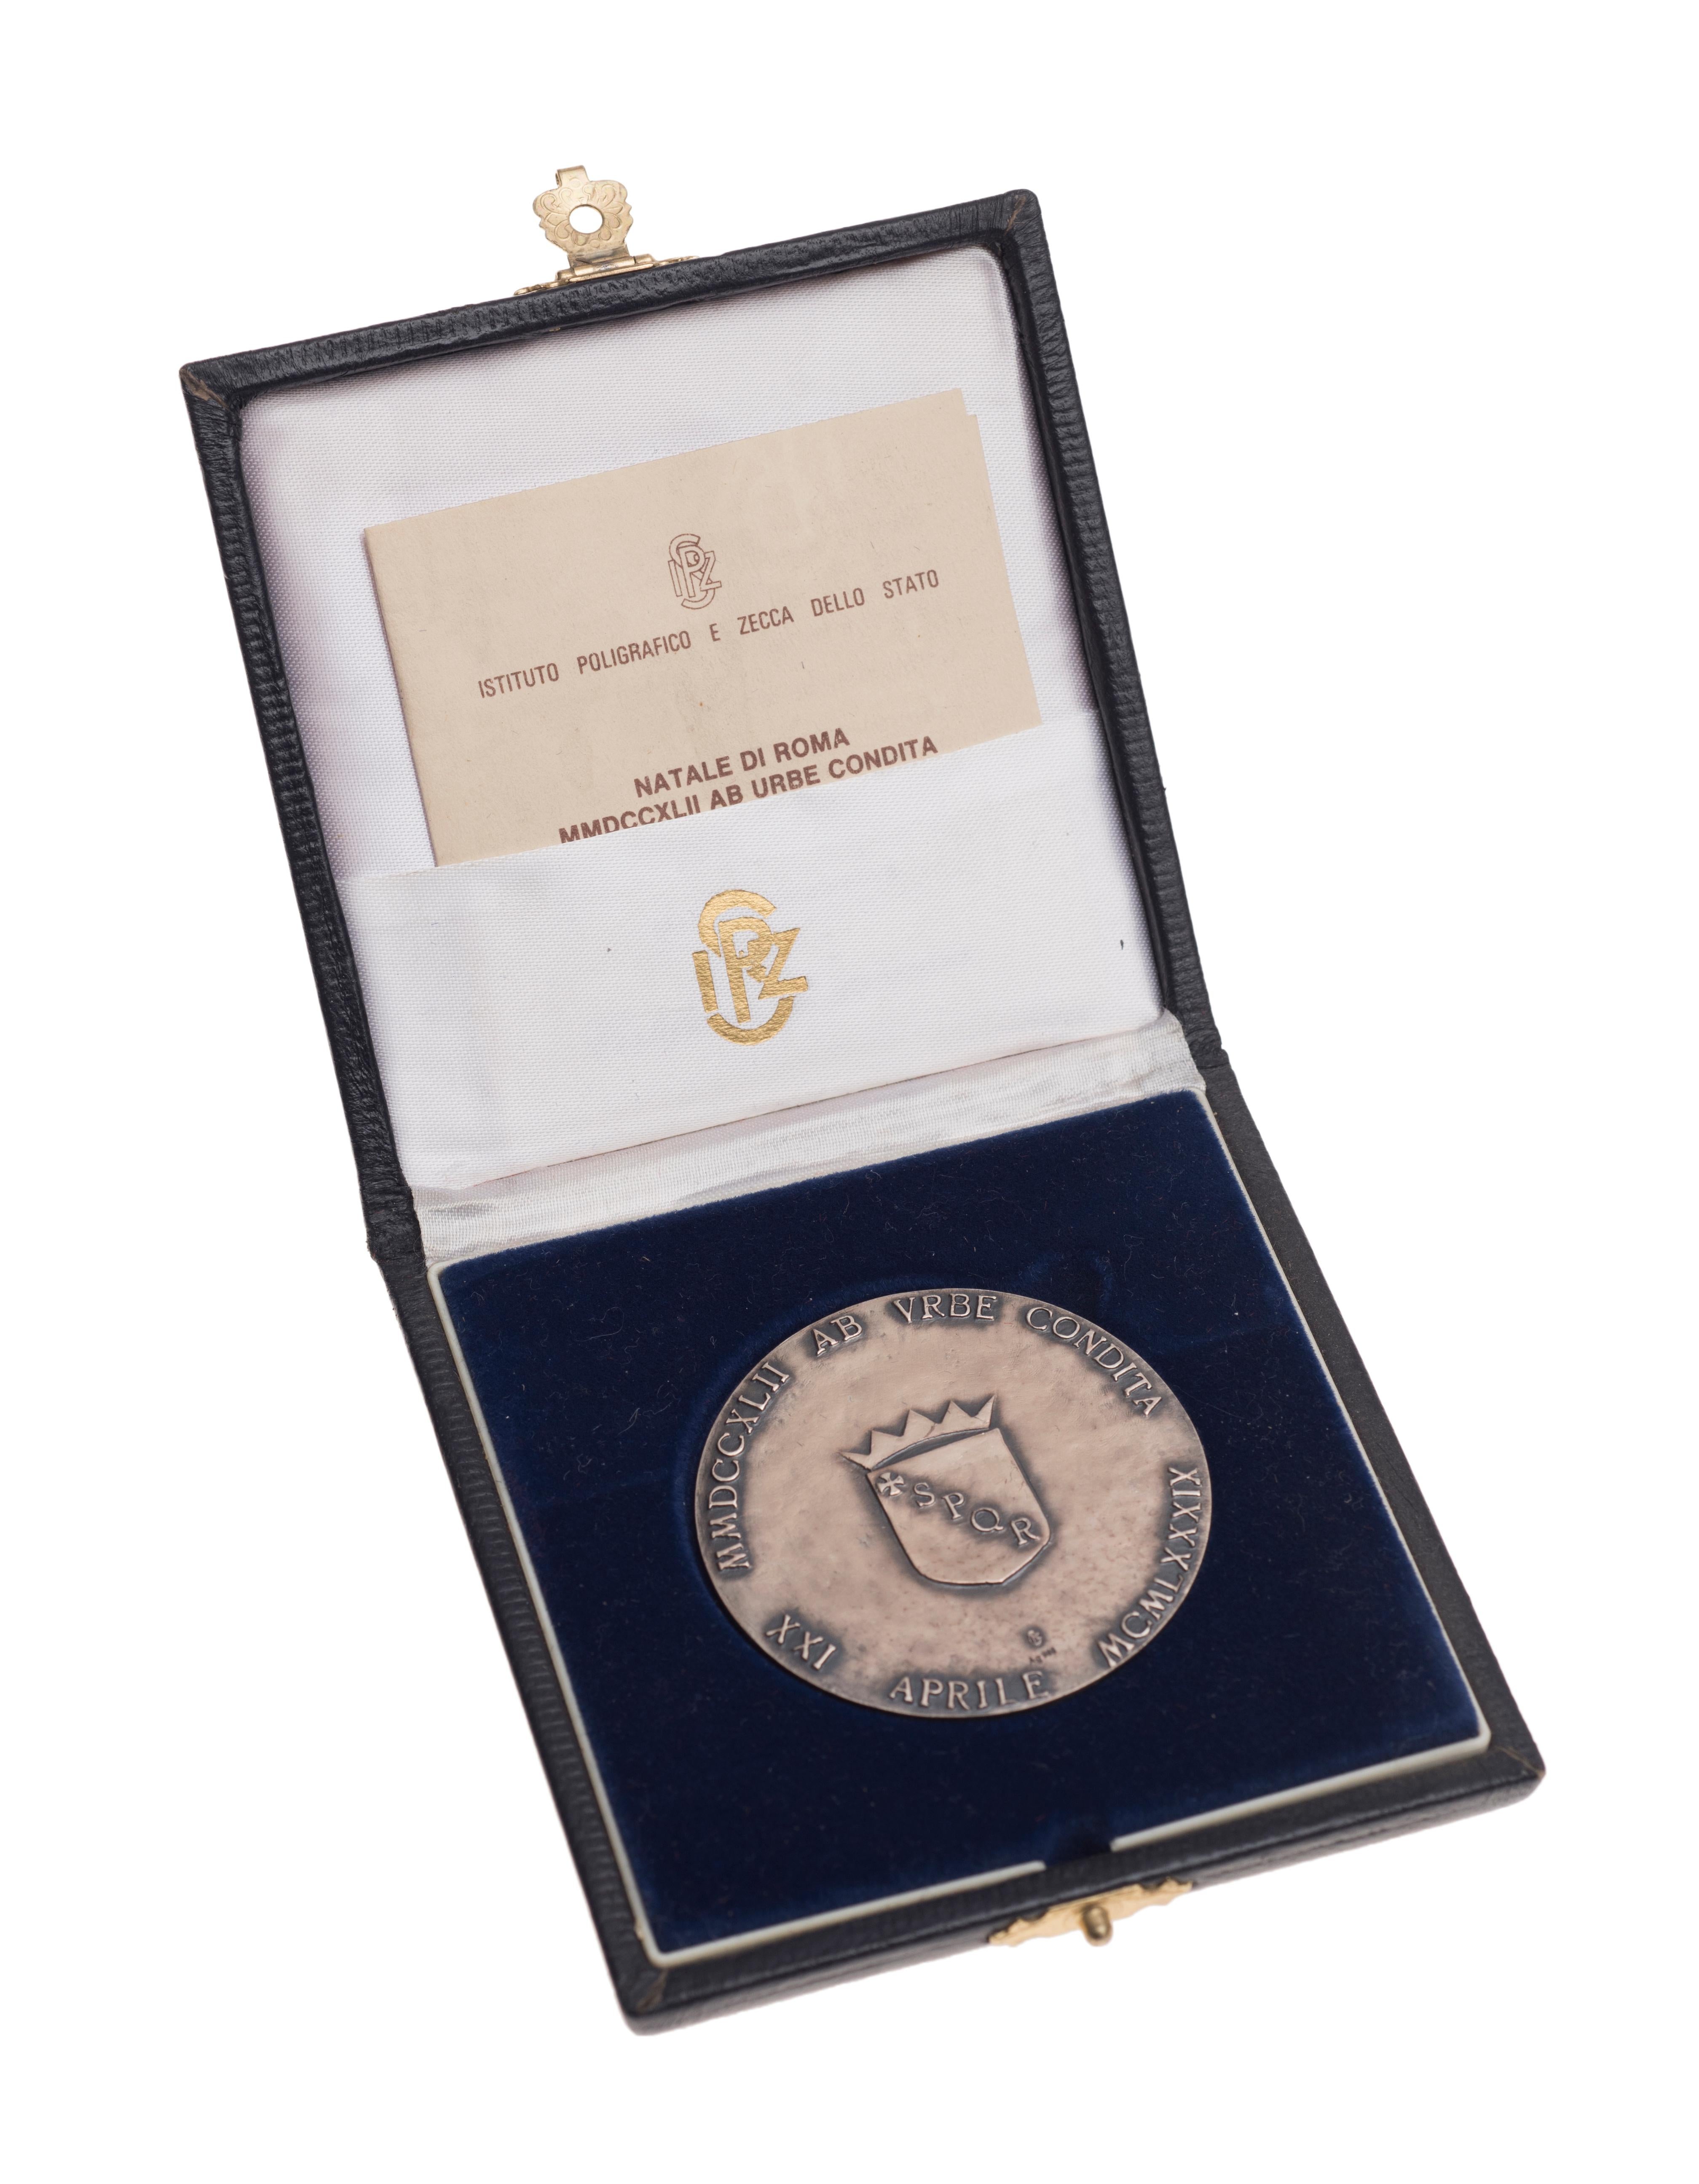 Ab Urbe Condita Medal is an original silver object realized by E. Lamagna in 1989.

The medal is celebrating the birth of Rome, was coined by Istituto Poligrafico e Zecca dello Stato. It includes an authenticity certificate and the case. 

This